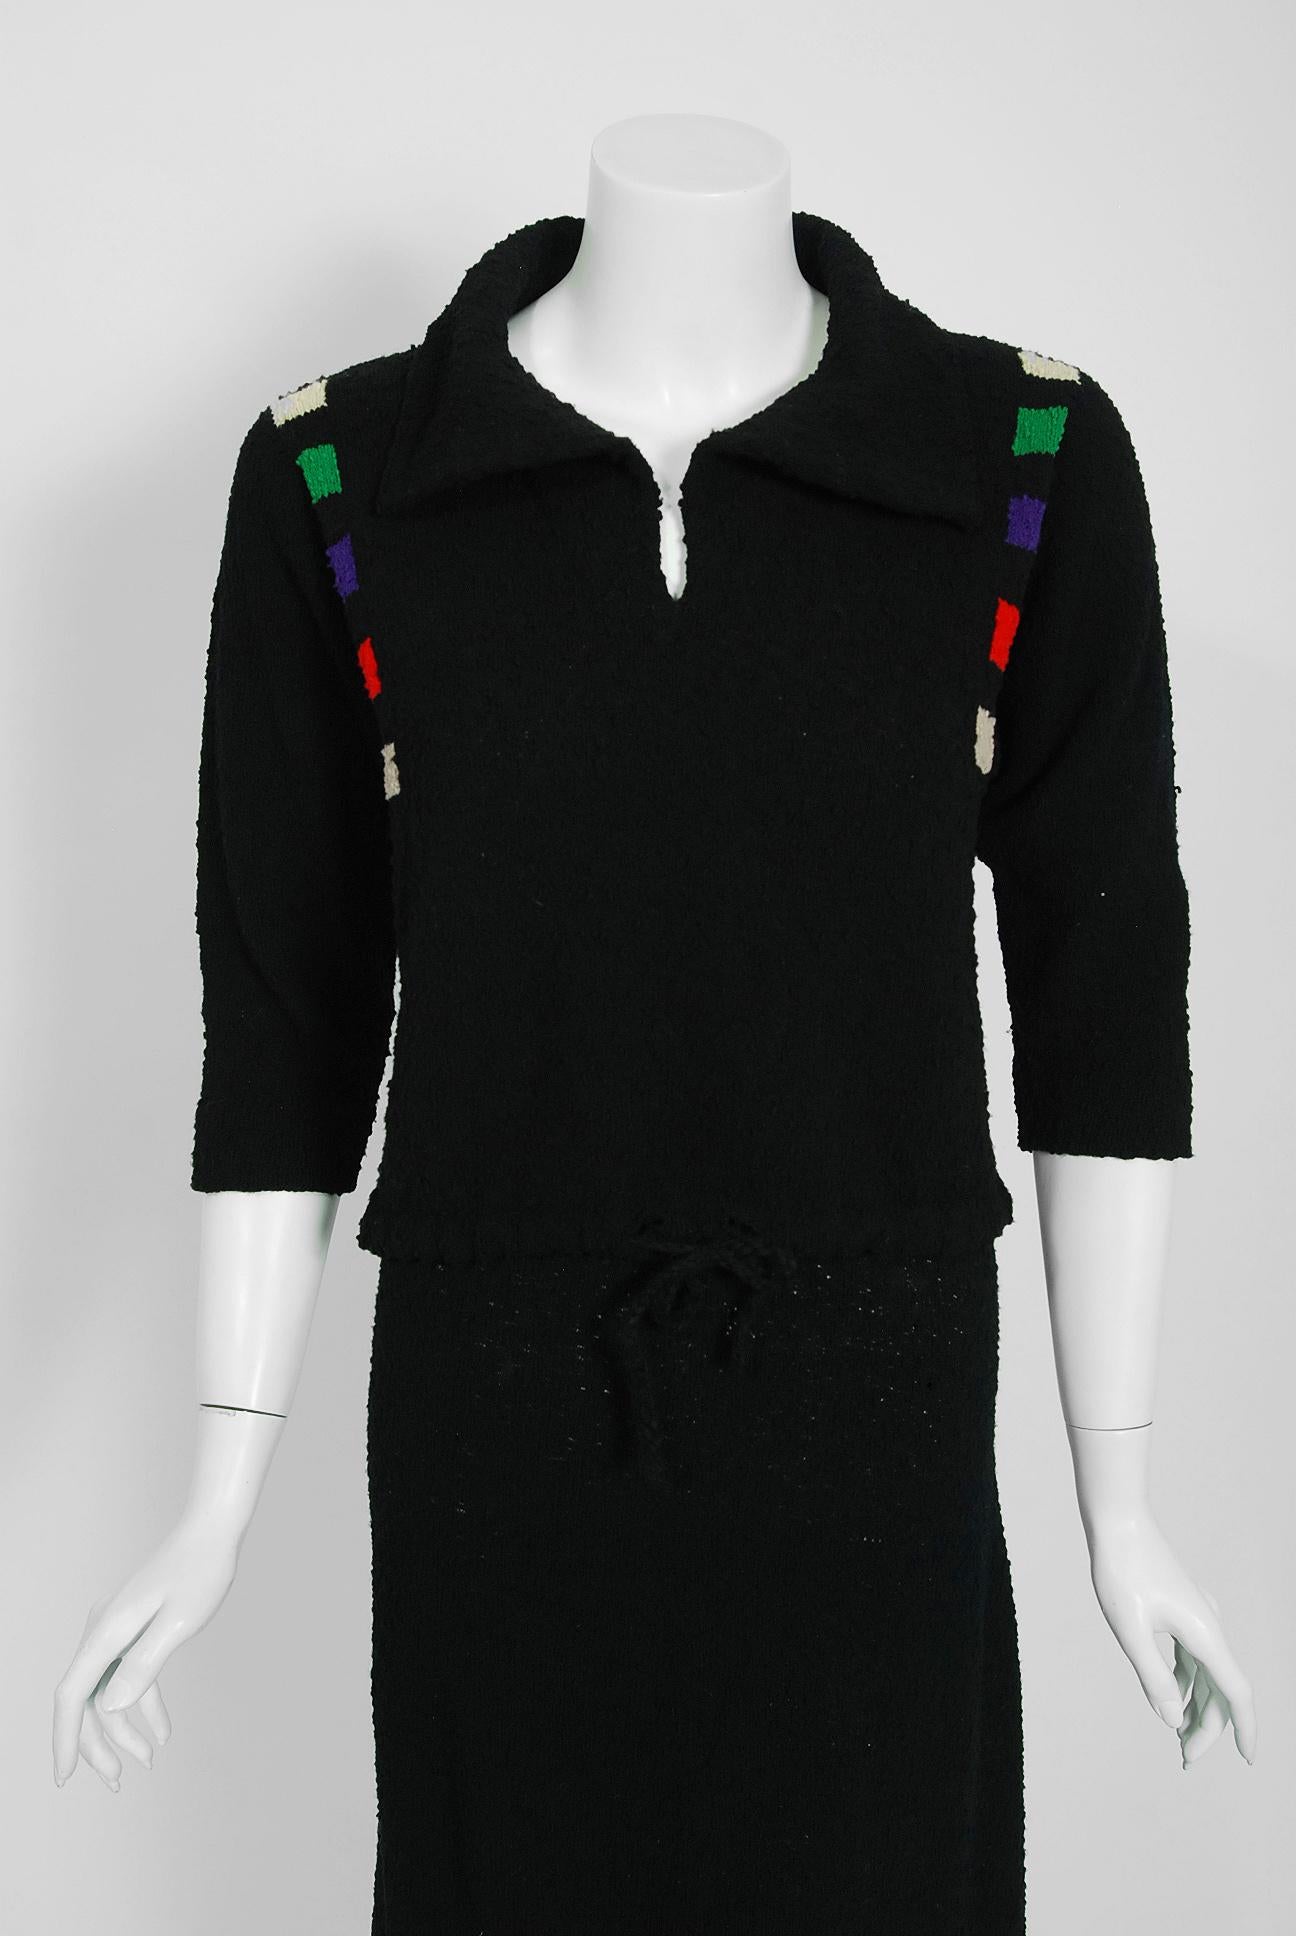 An alluring rainbow block-color deco motif boucle black wool-knit ensemble from the early 1940's Old Hollywood era of glamour. The beautiful sweater blouse has a flattering adjustable waist-tie for an extra nipped look. I love the collared plunge